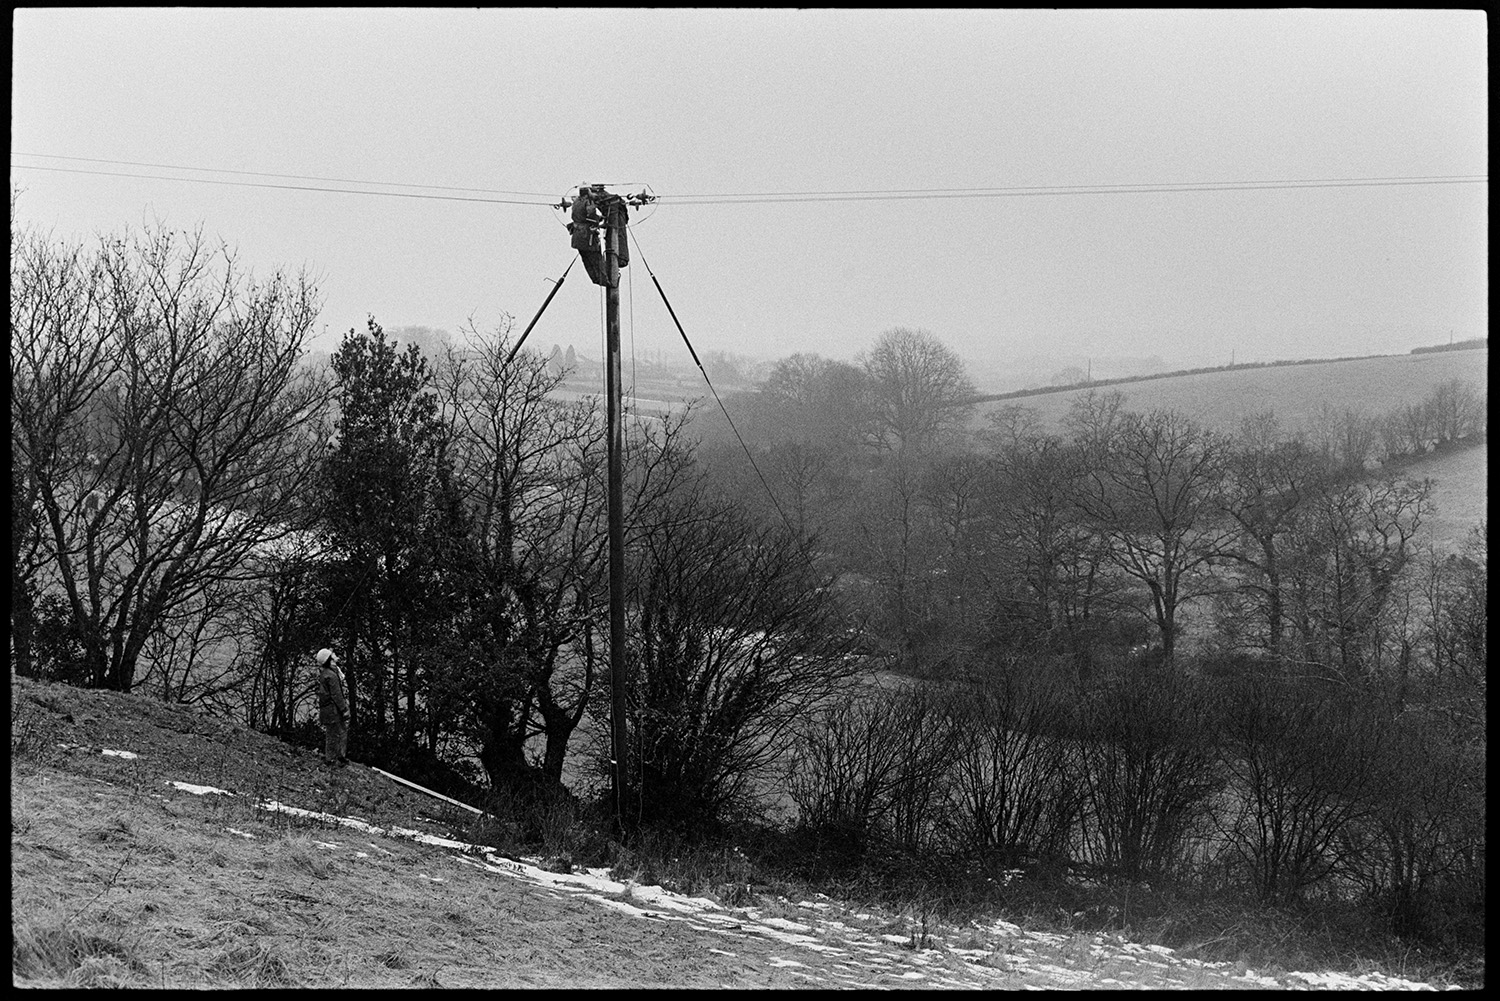 Men replacing electricity power lines, Land Rover and drums of cable. 
[A utility pole in a field at Dolton supporting electricity power cables. Patches of snow can be seen in the field.]